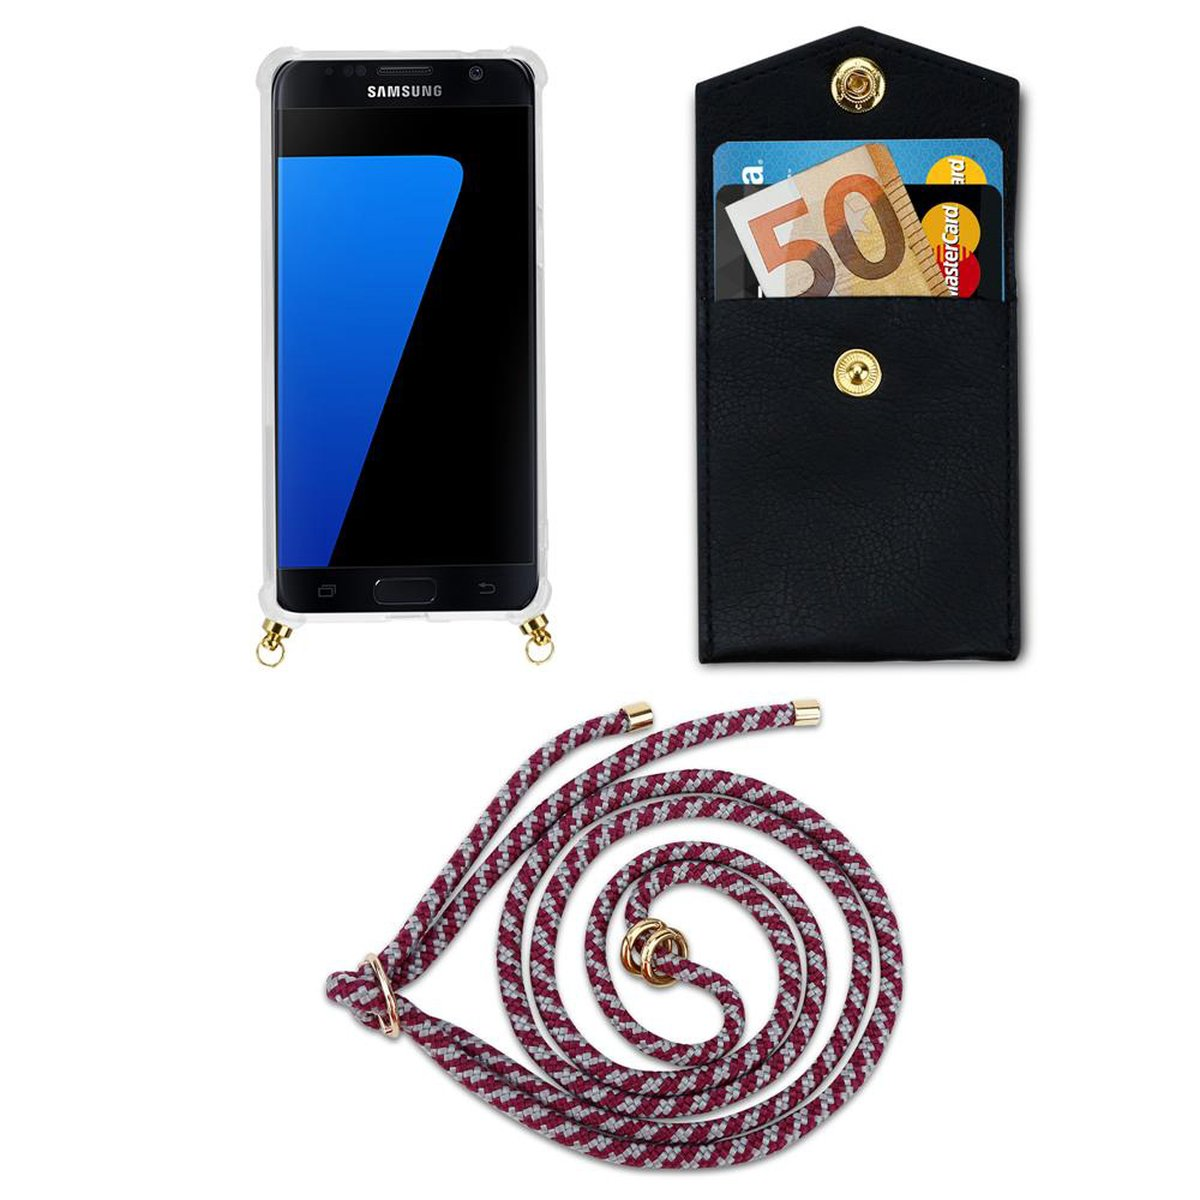 Hülle, Gold abnehmbarer ROT Backcover, S7, Handy WEIß CADORABO und mit Ringen, Band Galaxy Kordel Samsung, Kette